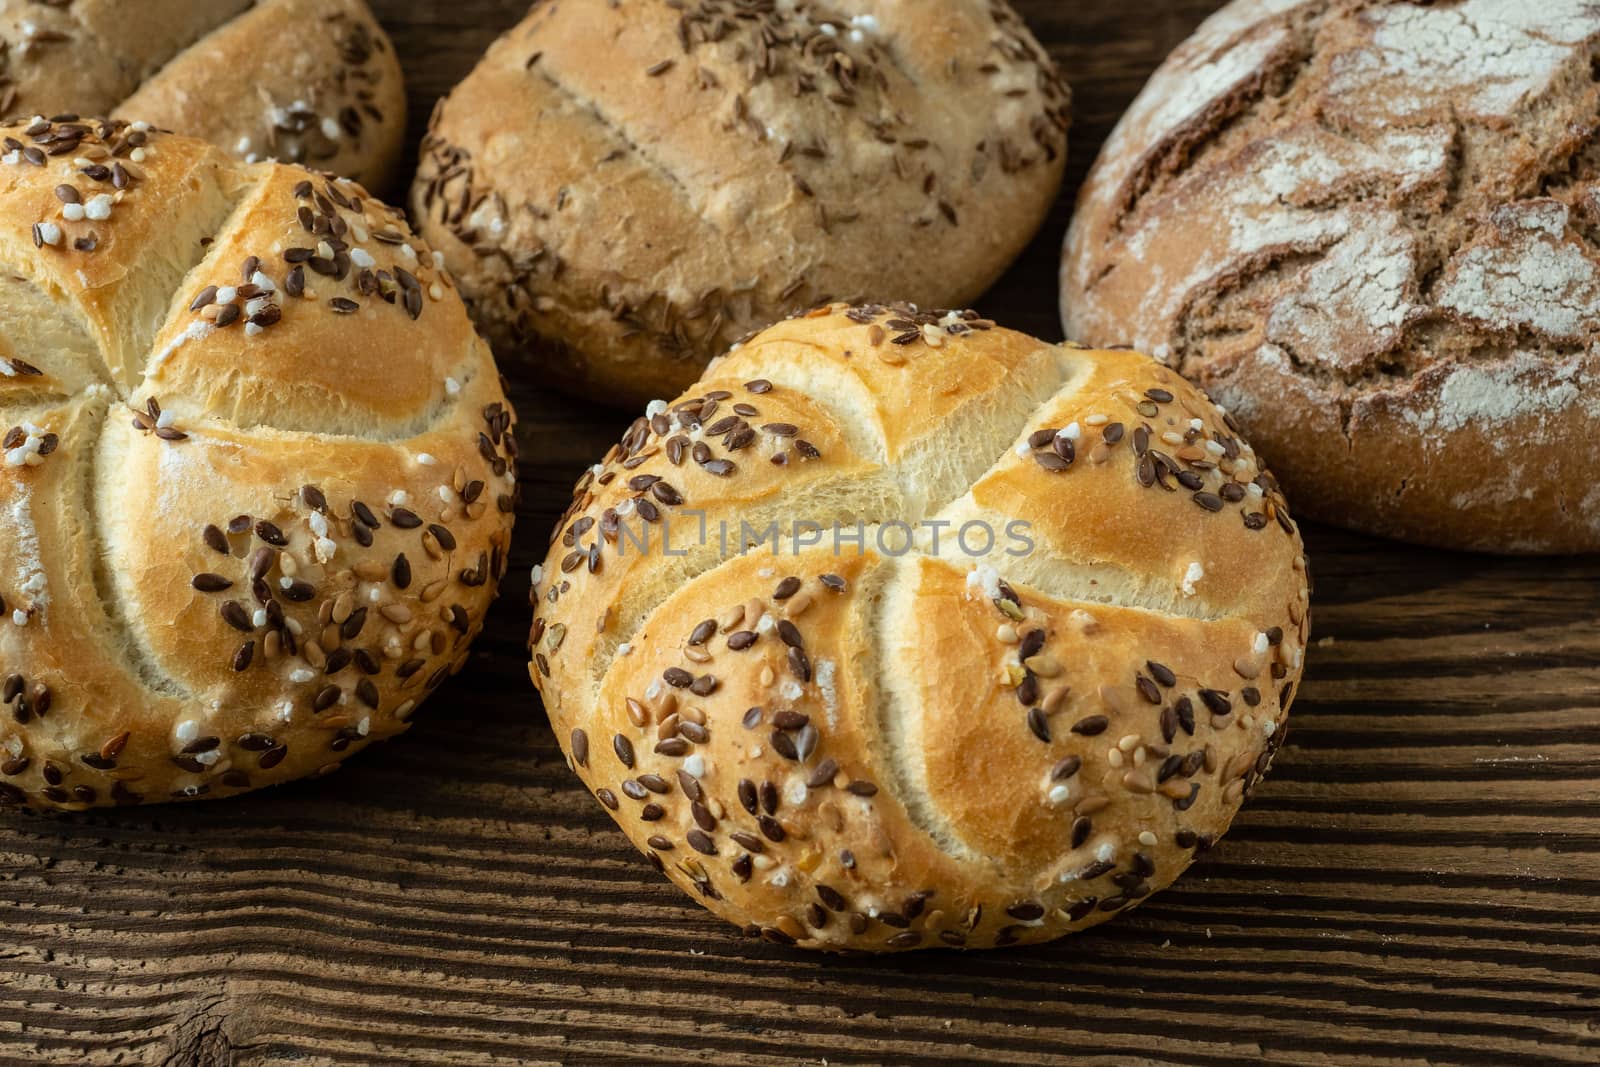 Different bread on a rustic wooden background. Bakery assortment of bread.